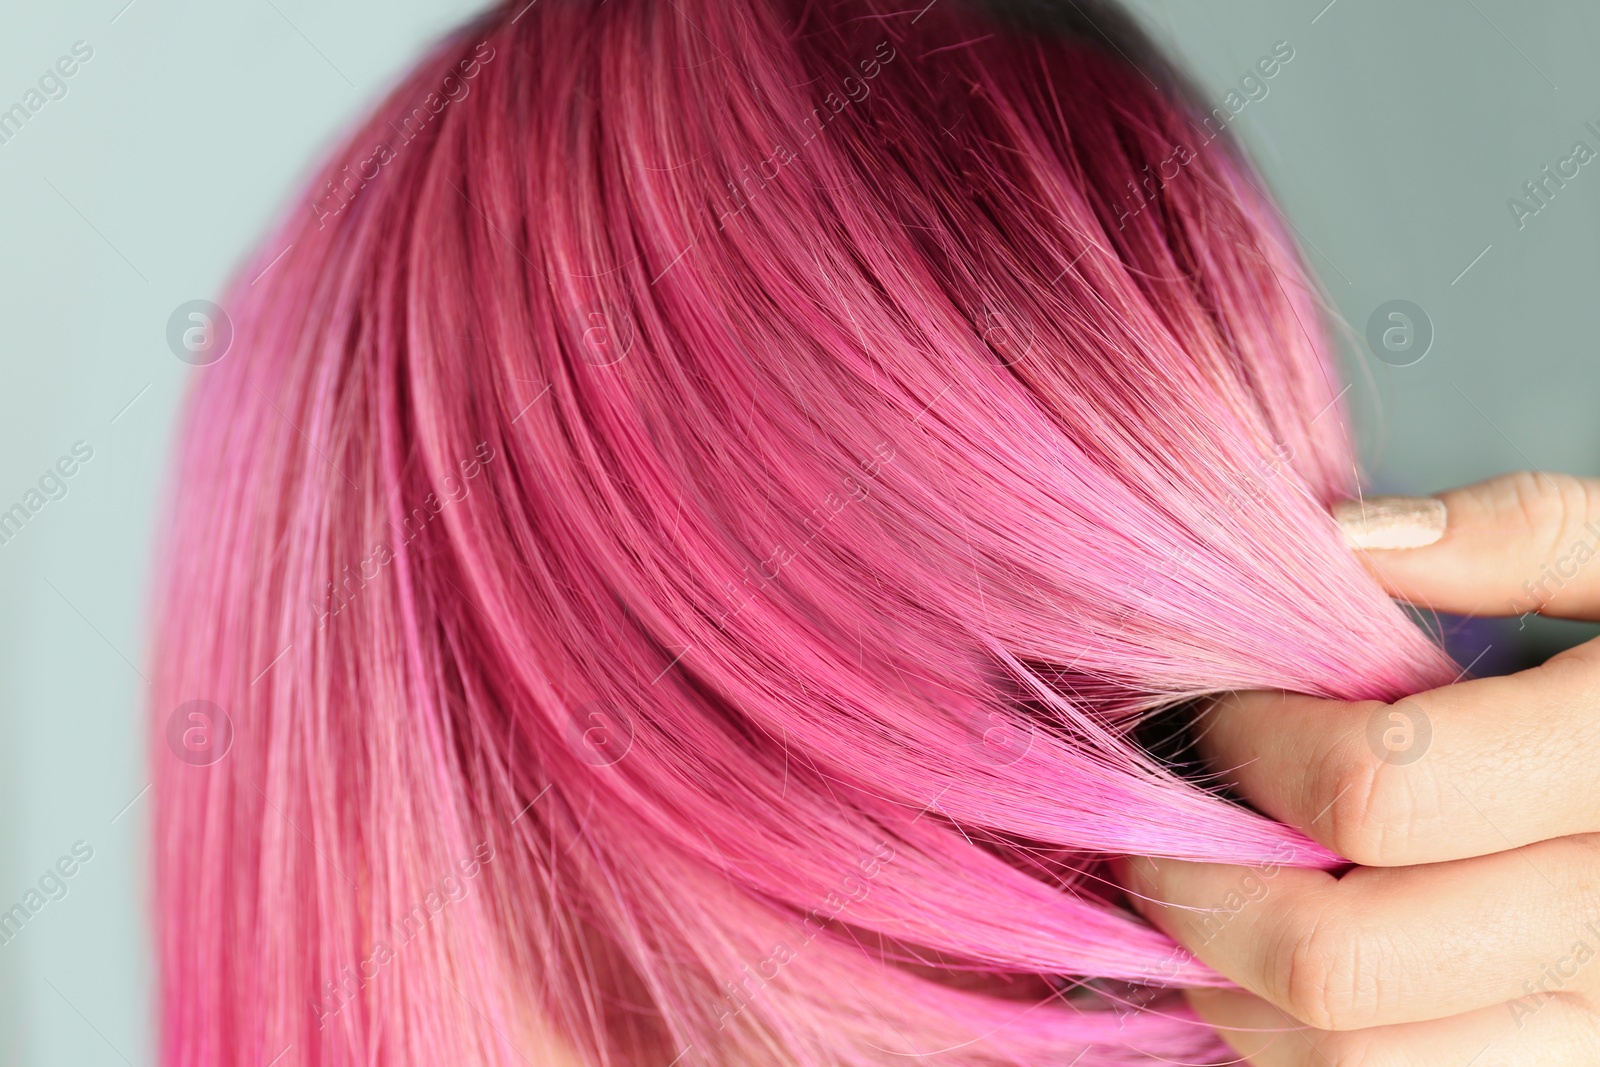 Photo of Woman with color dyed hair, close up view. Trendy hairstyle